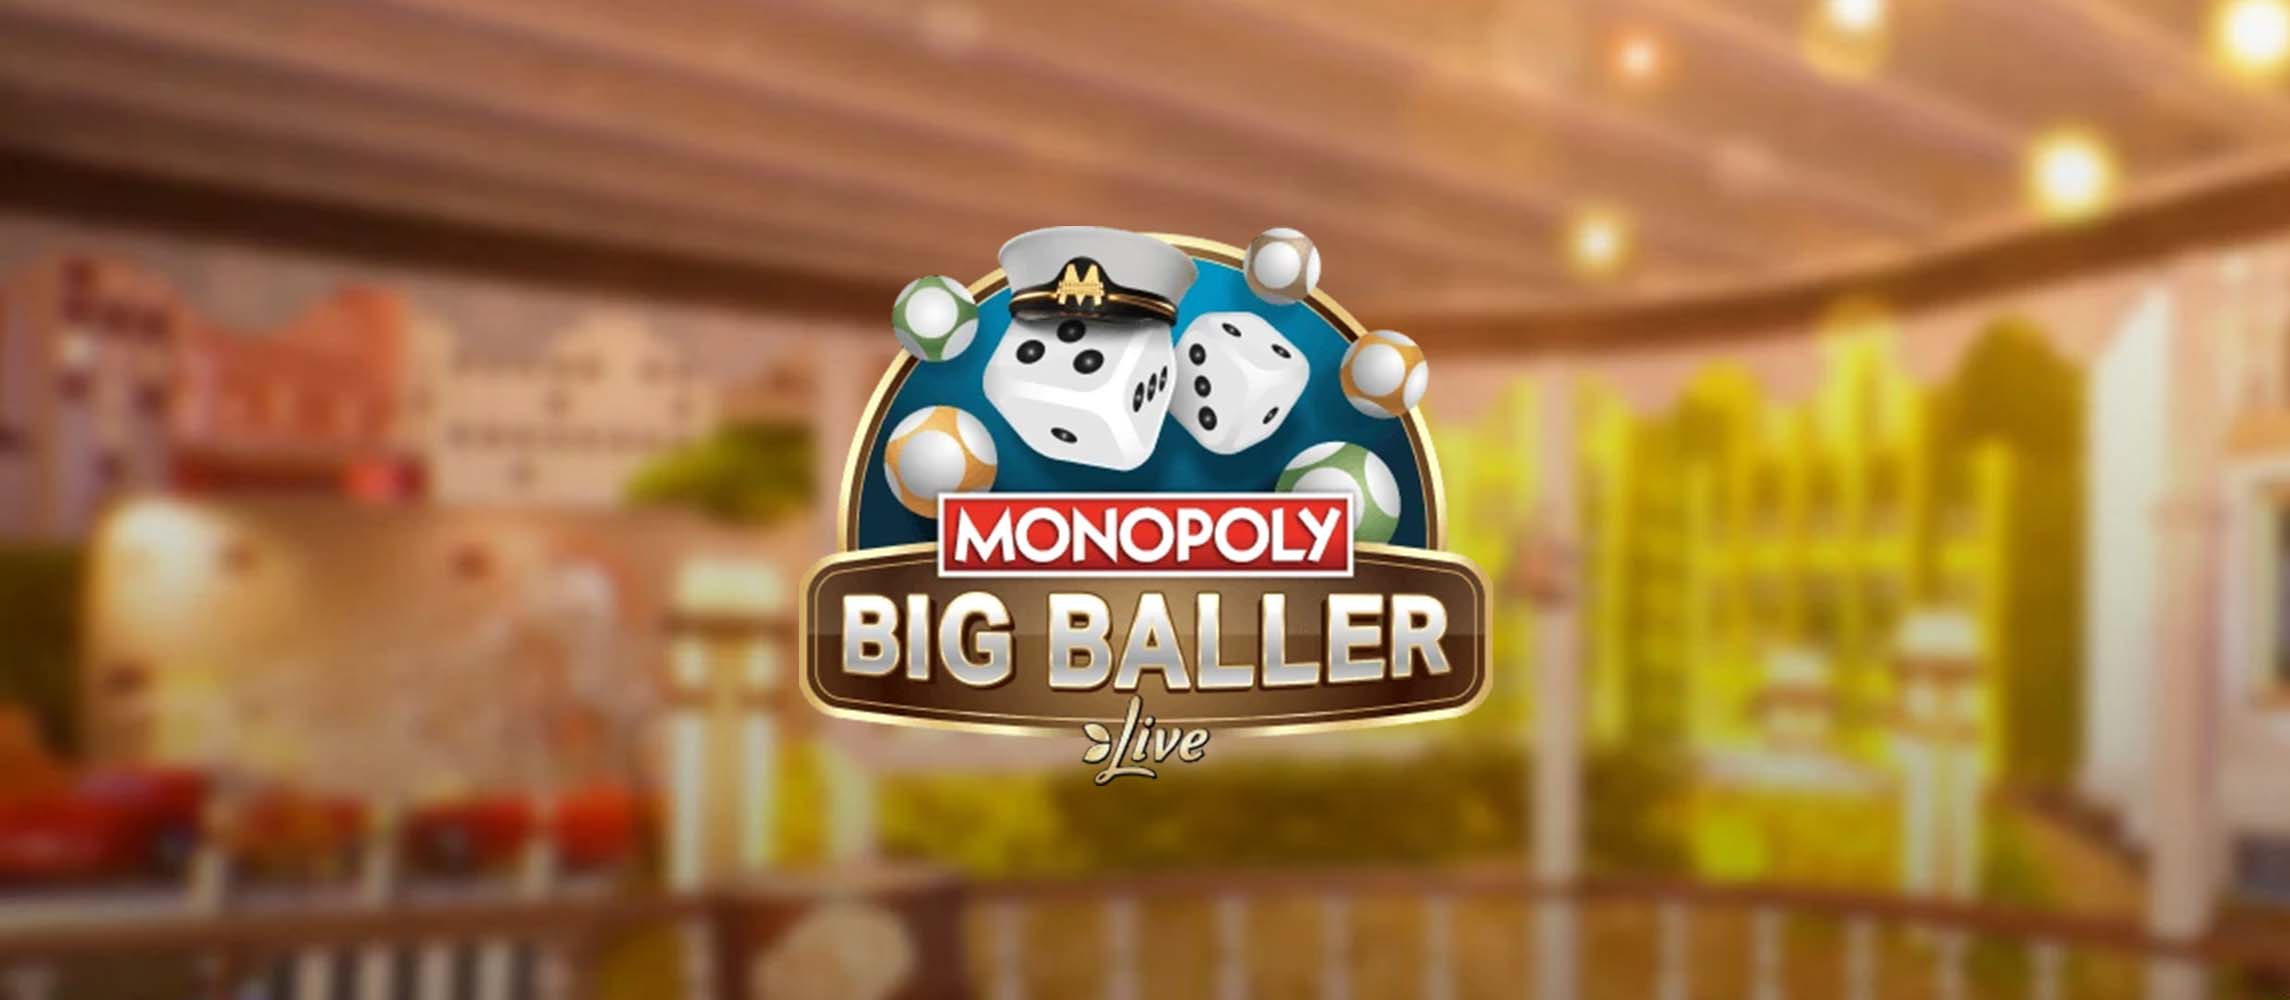 Monopoly Big Baller by Evolution Gaming